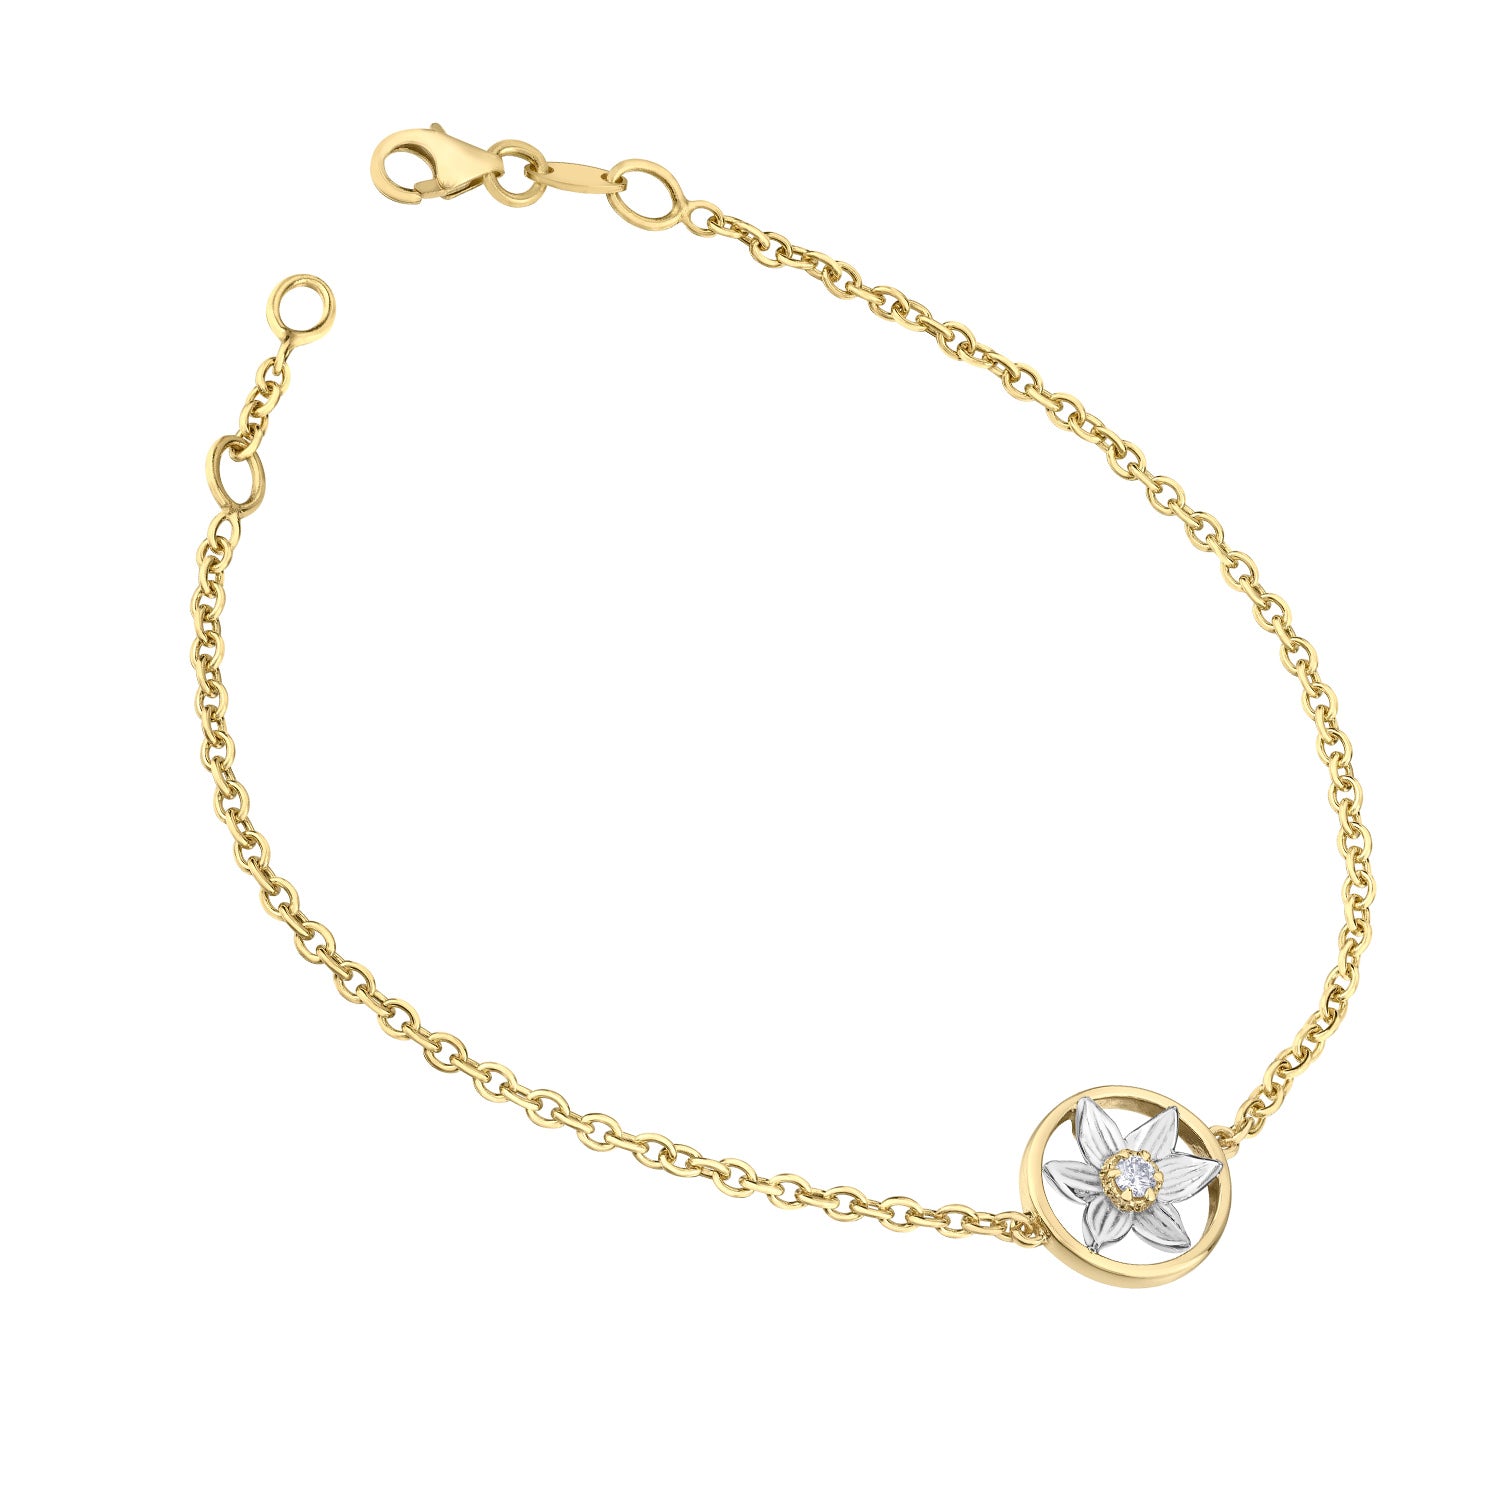 Crafted in 14KT white and yellow Certified Canadian Gold, this bracelet features a Manitoba prairie crocus flower set with a round brilliant-cut Canadian diamond